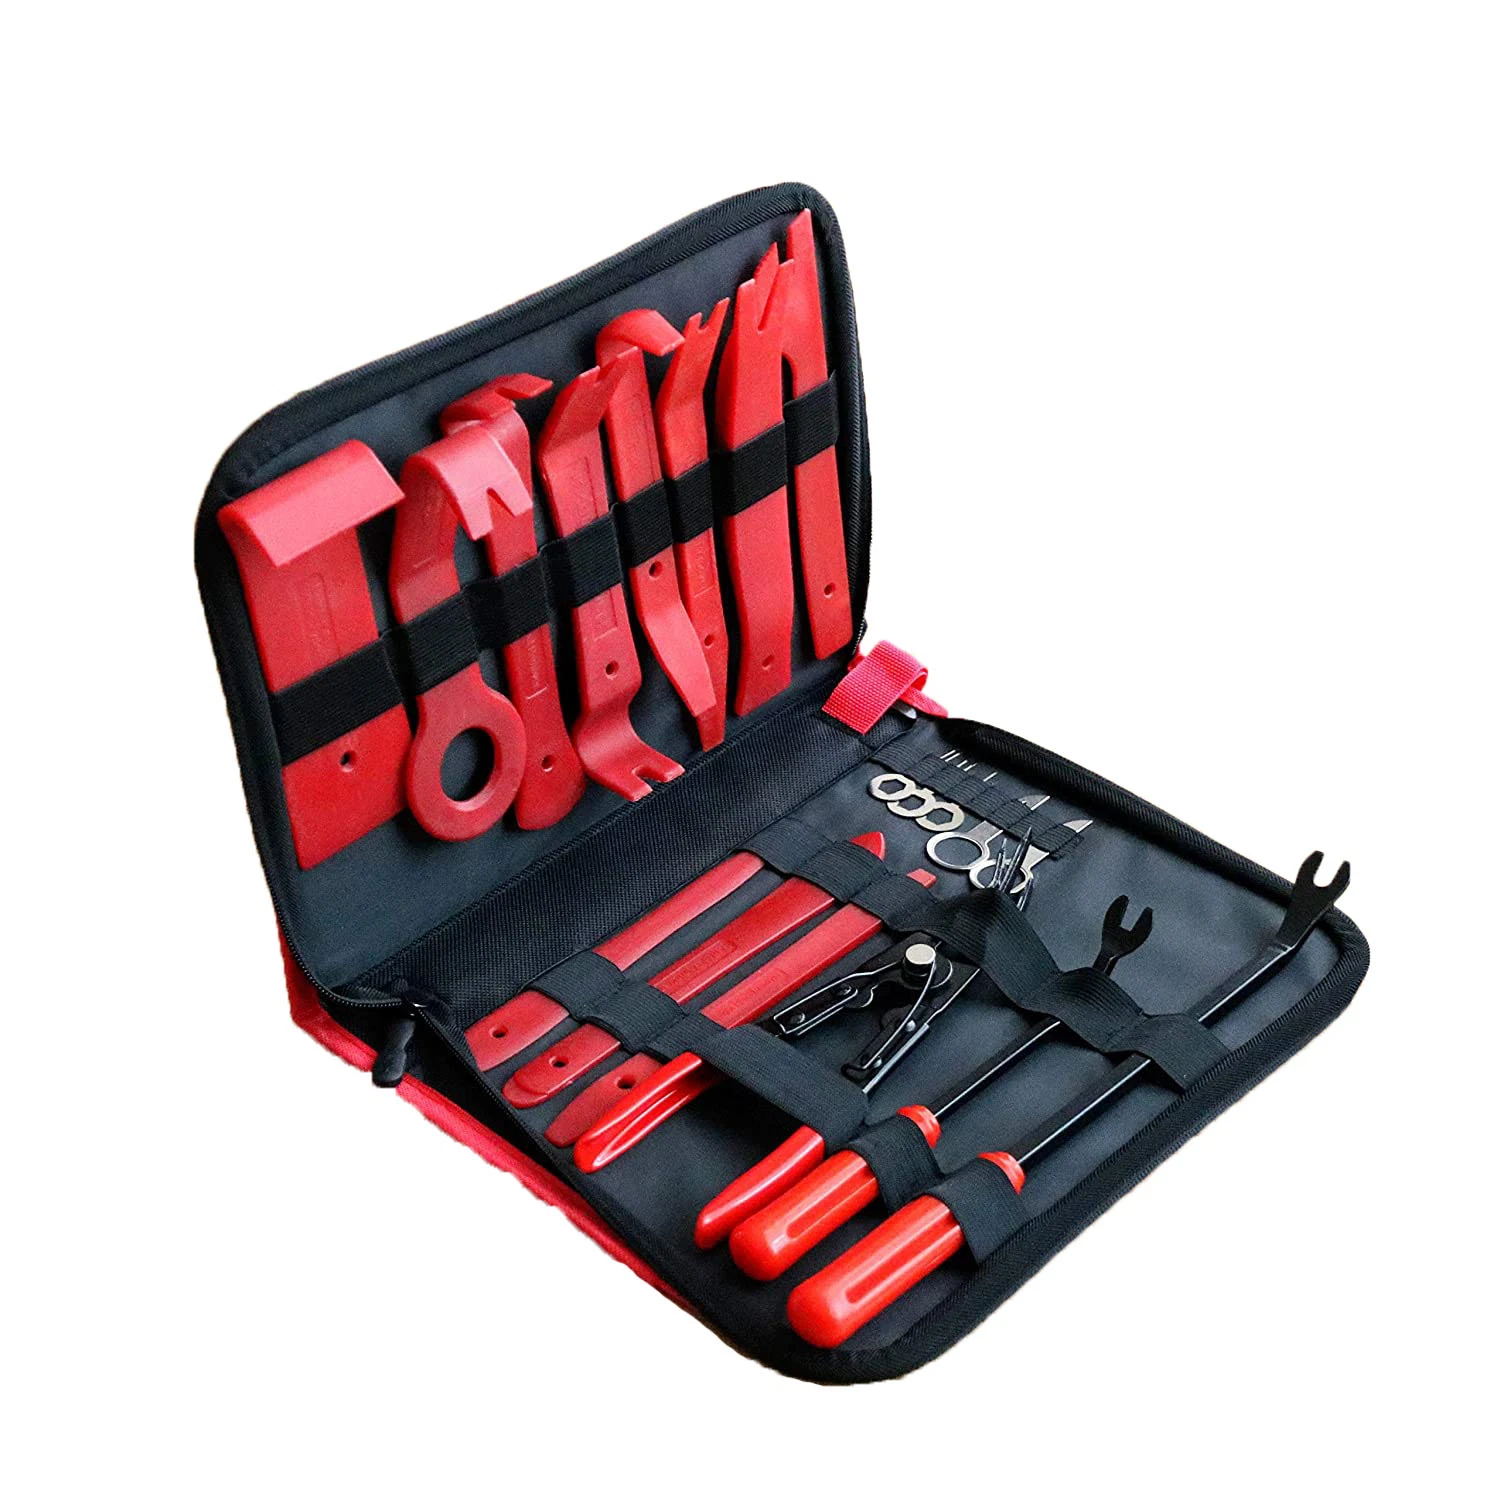 19 PCS Auto Trim Removal Tool Set for Car Panel Dash Audio Radio Removal Installer and Repair Pry Tool Kits with Storage Bag